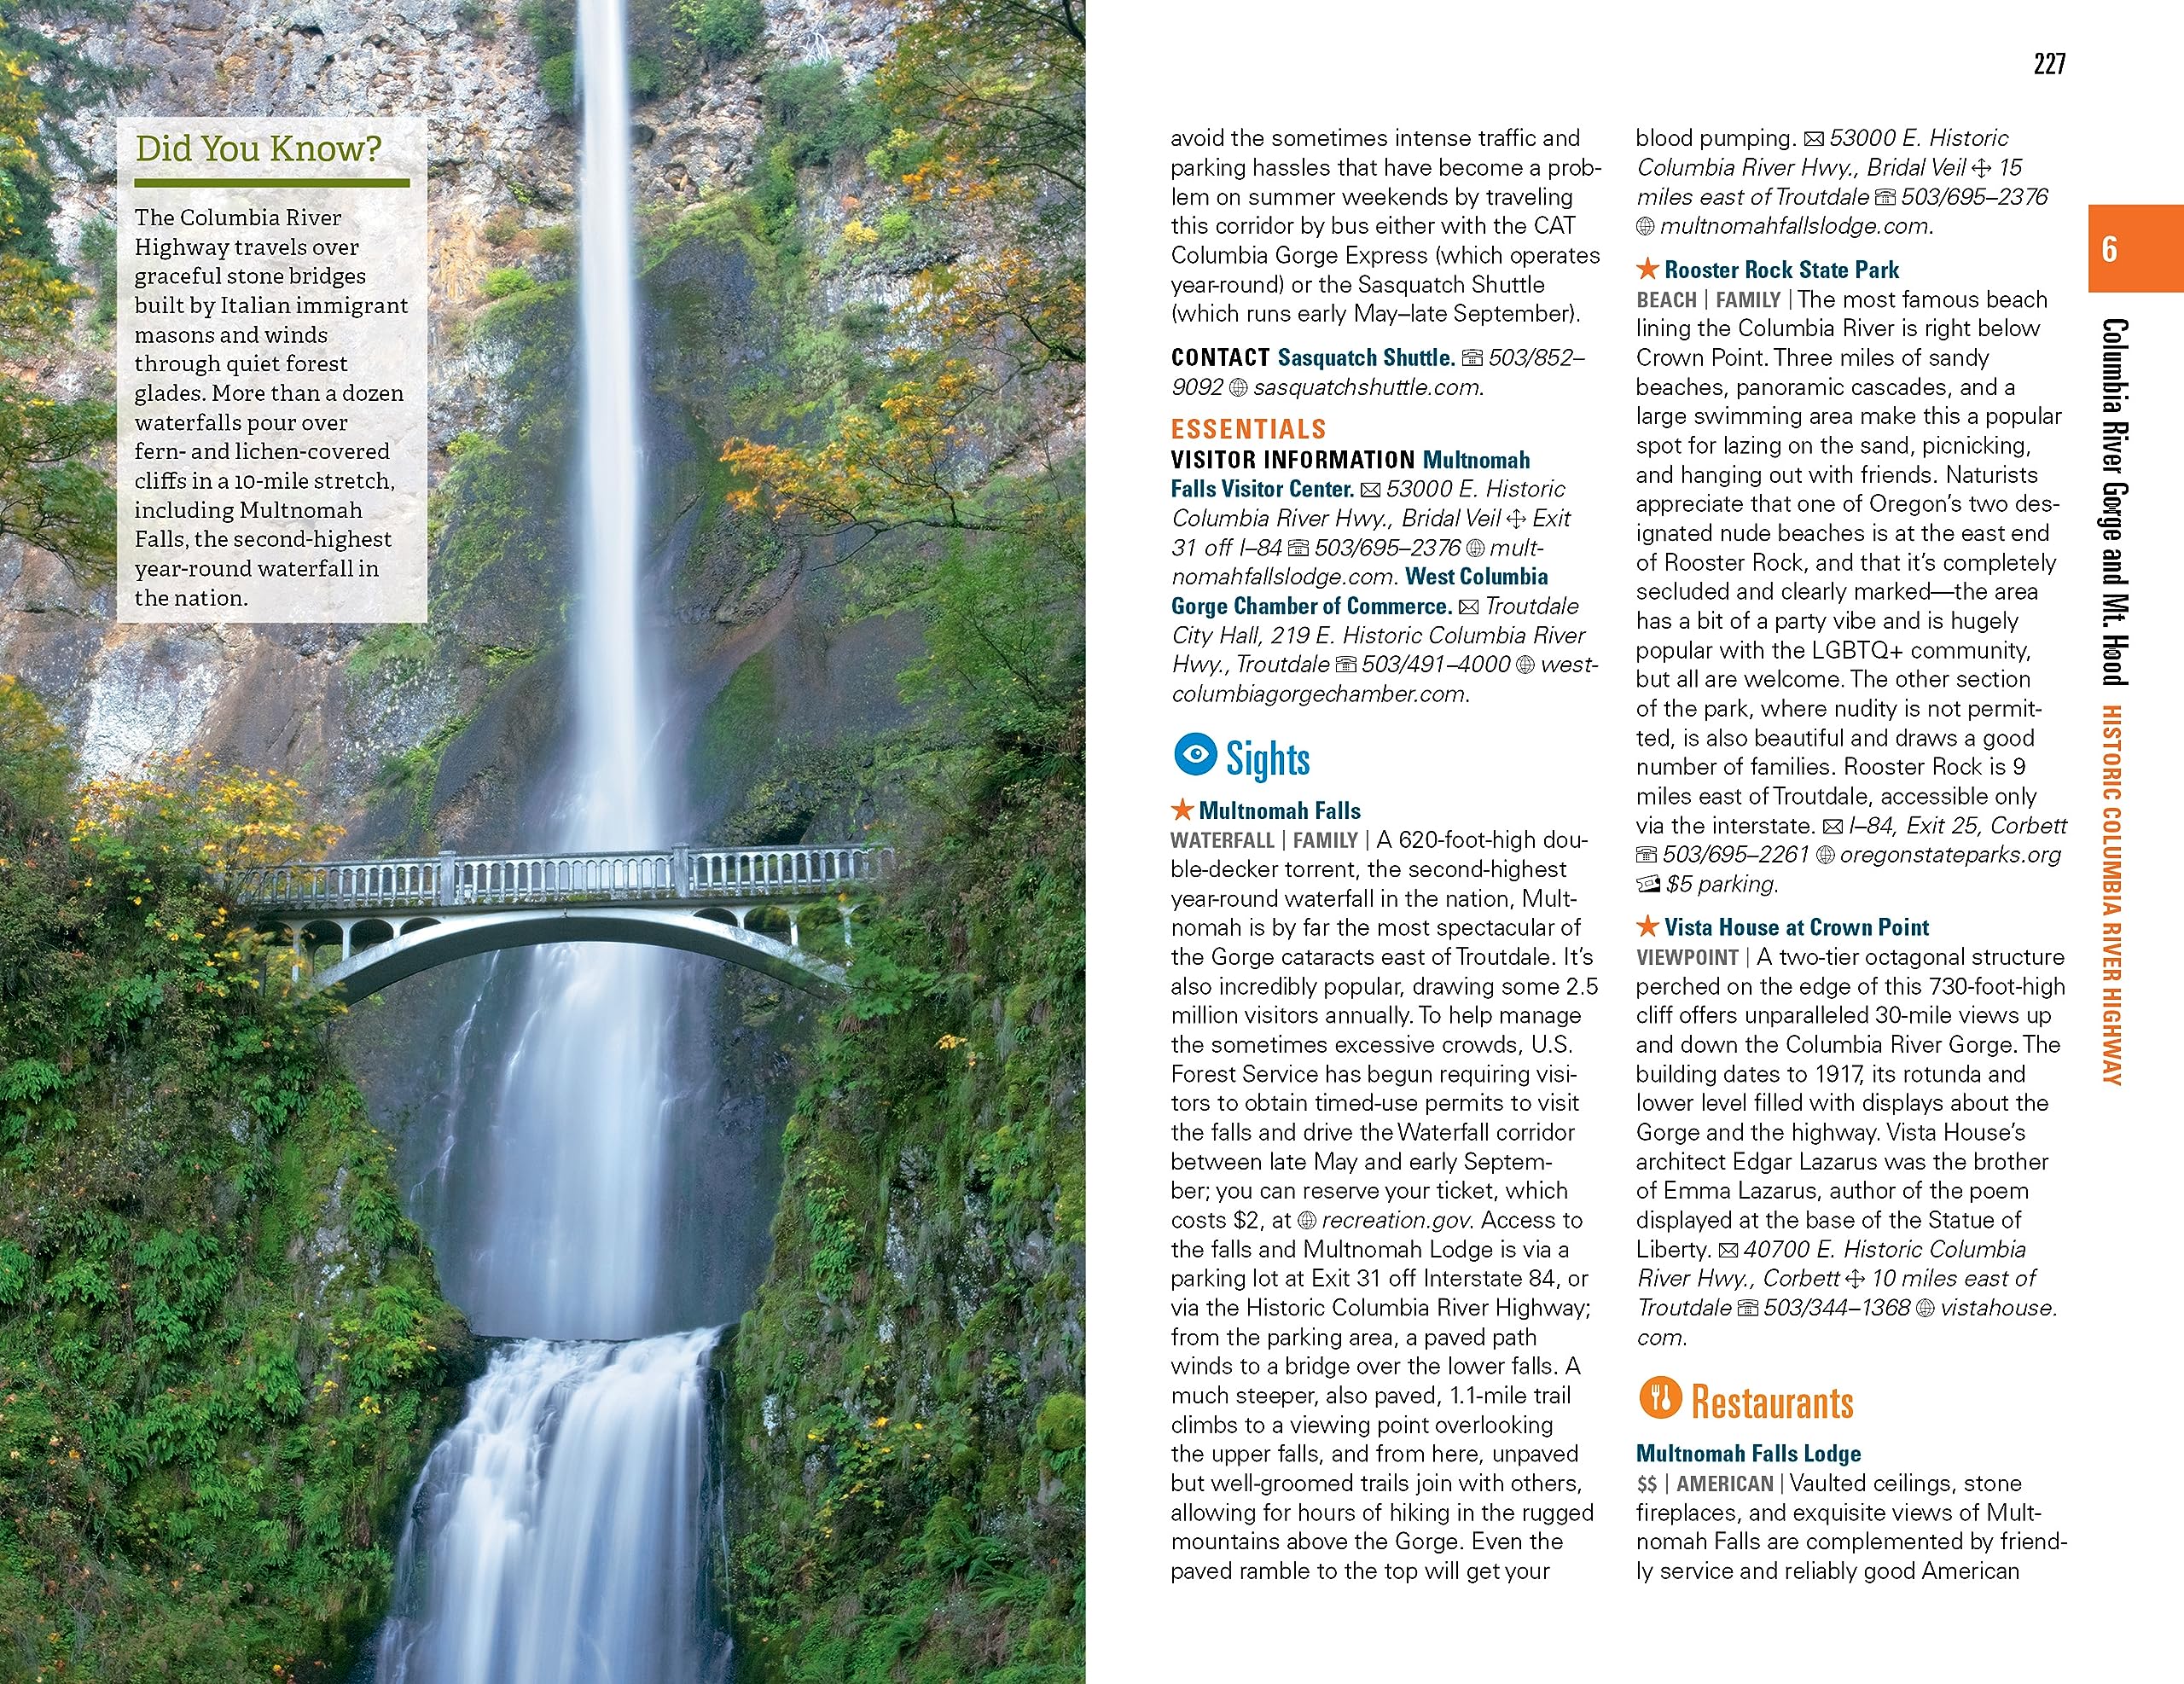 Fodor's Pacific Northwest: Portland, Seattle, Vancouver & the Best of Oregon and Washington (Full-color Travel Guide)